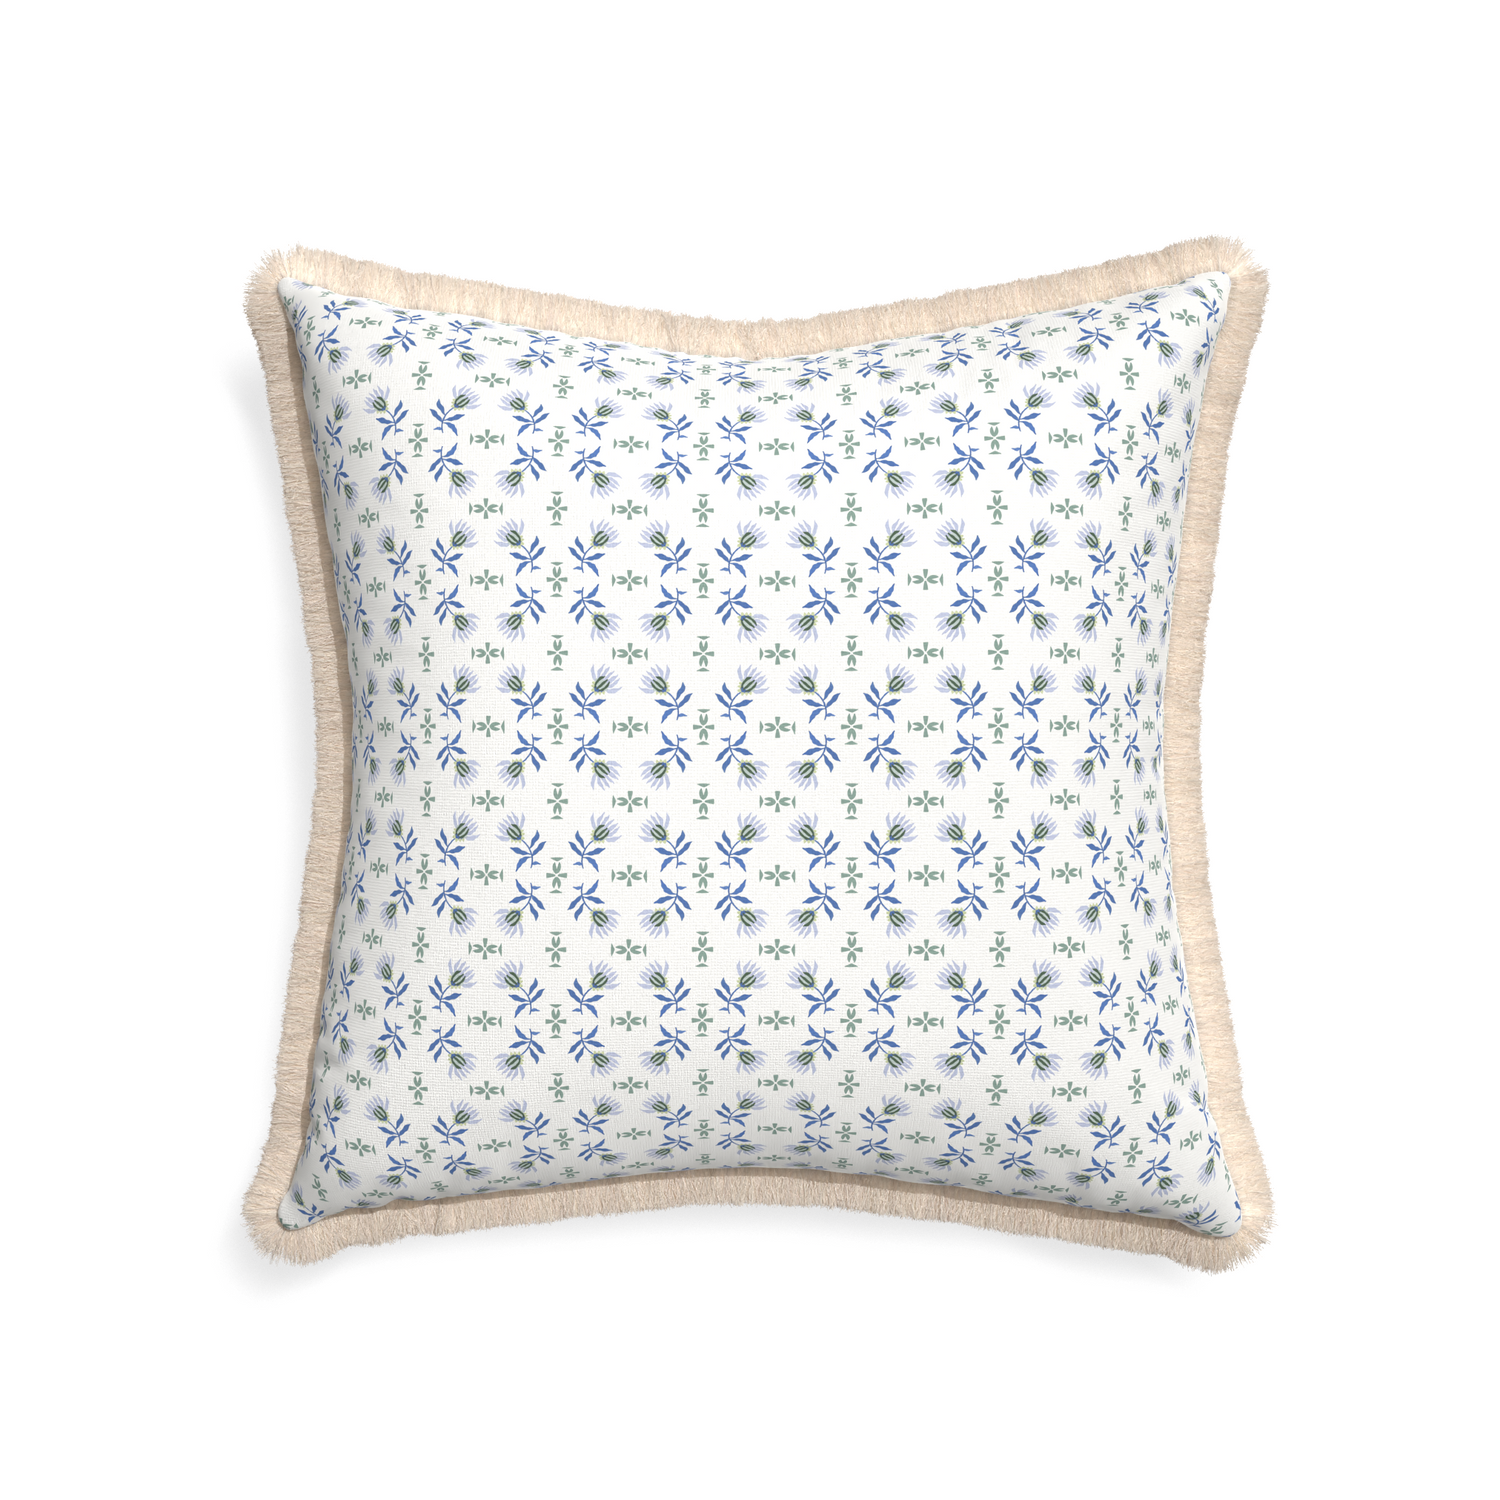 22-square lee custom pillow with cream fringe on white background